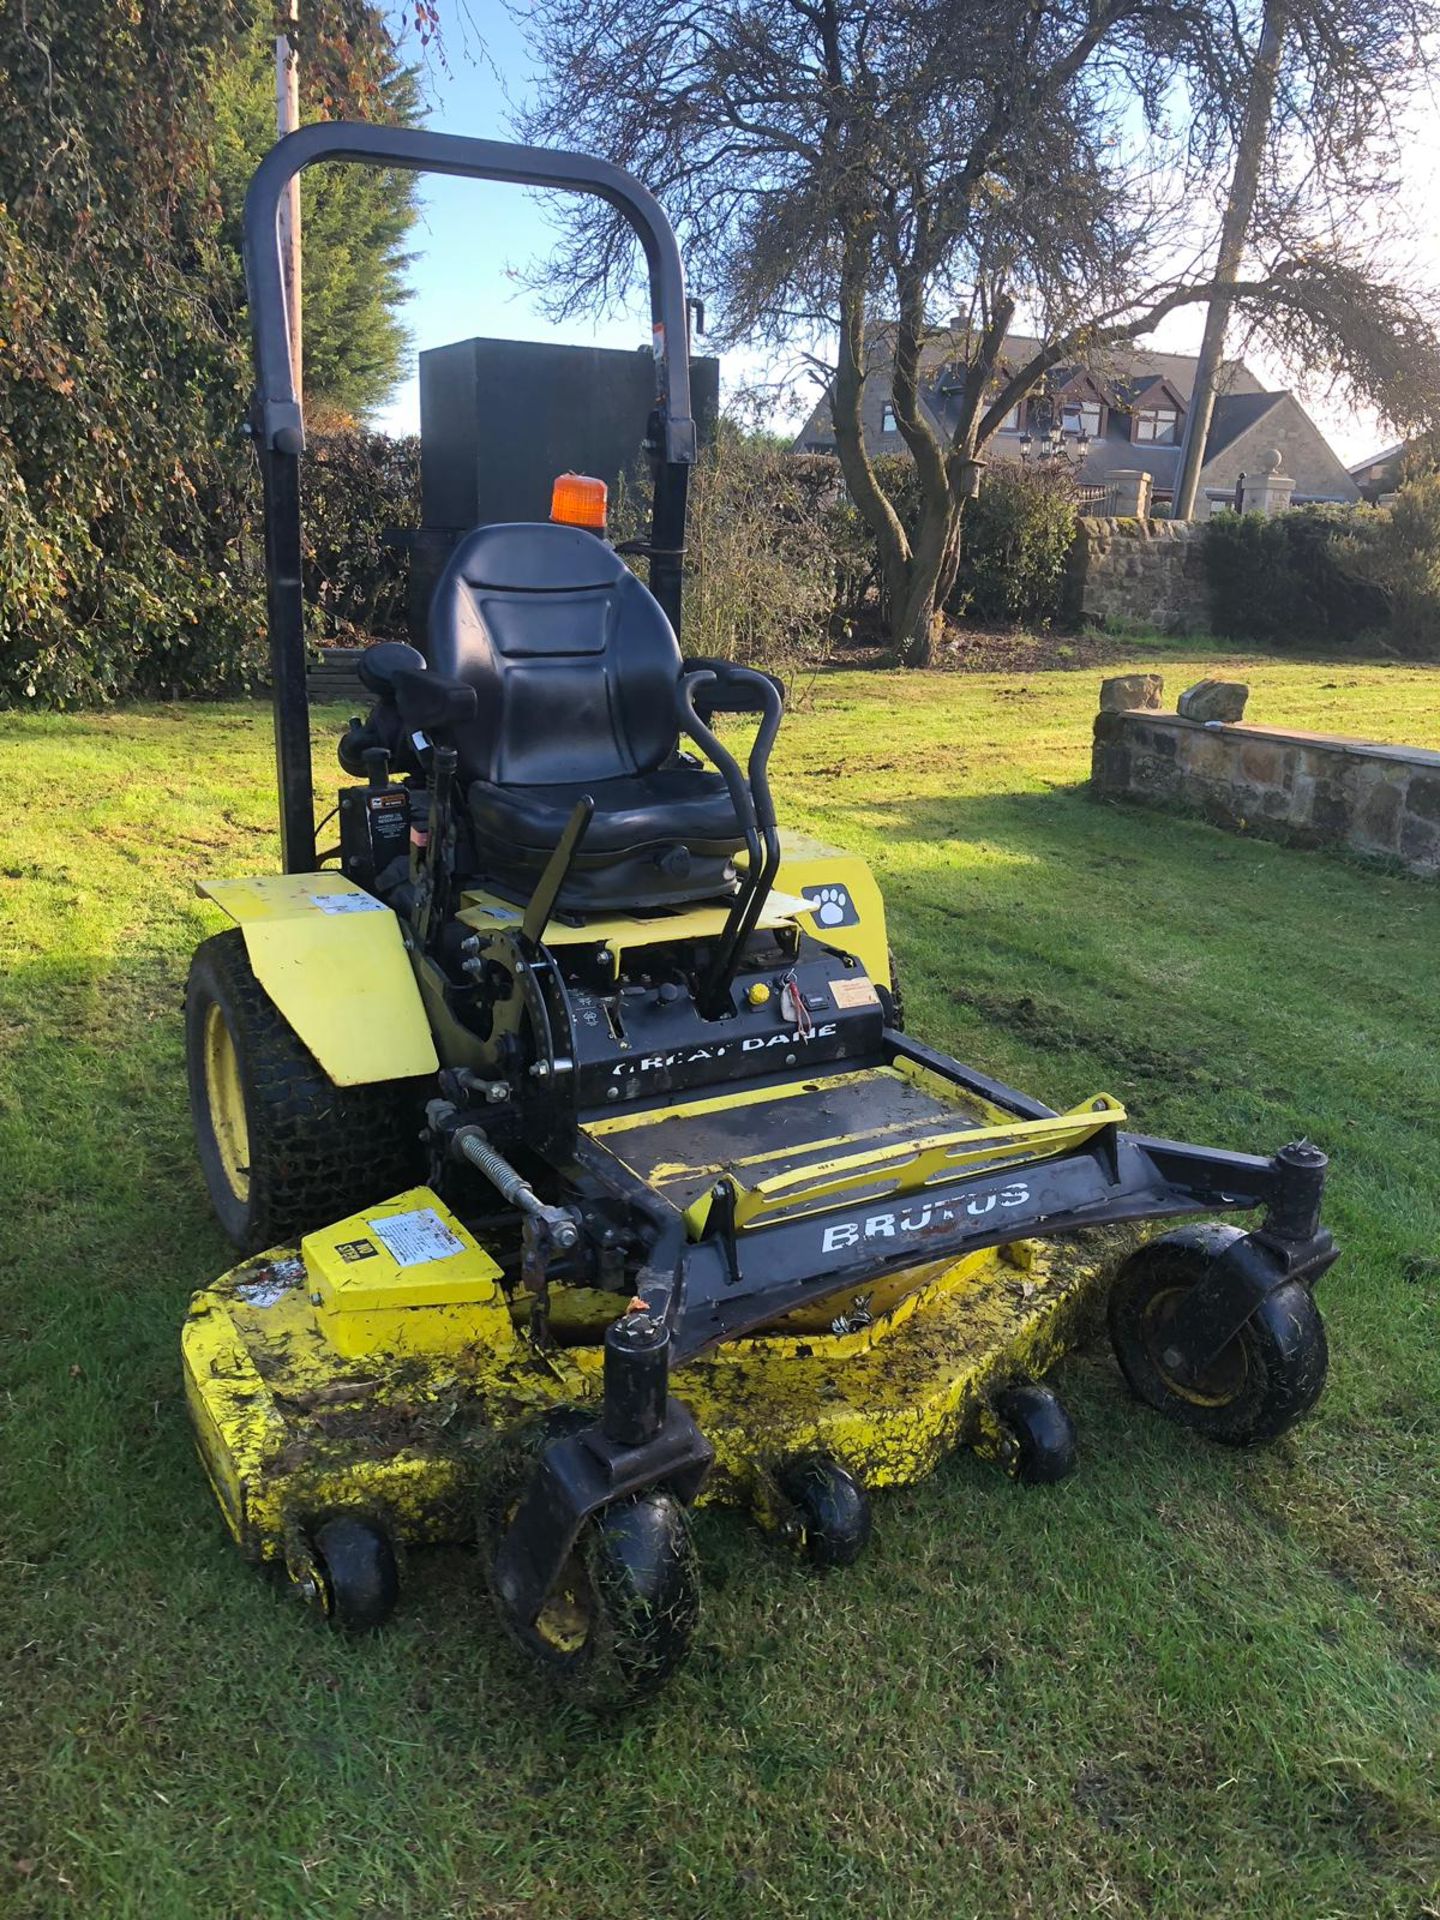 2012/12 REG GREAT DANE BRUTUS RIDE ON PETROL LAWN MOWER WITH DELUXE SEAT AND ROLL BAR *PLUS VAT* - Image 2 of 16